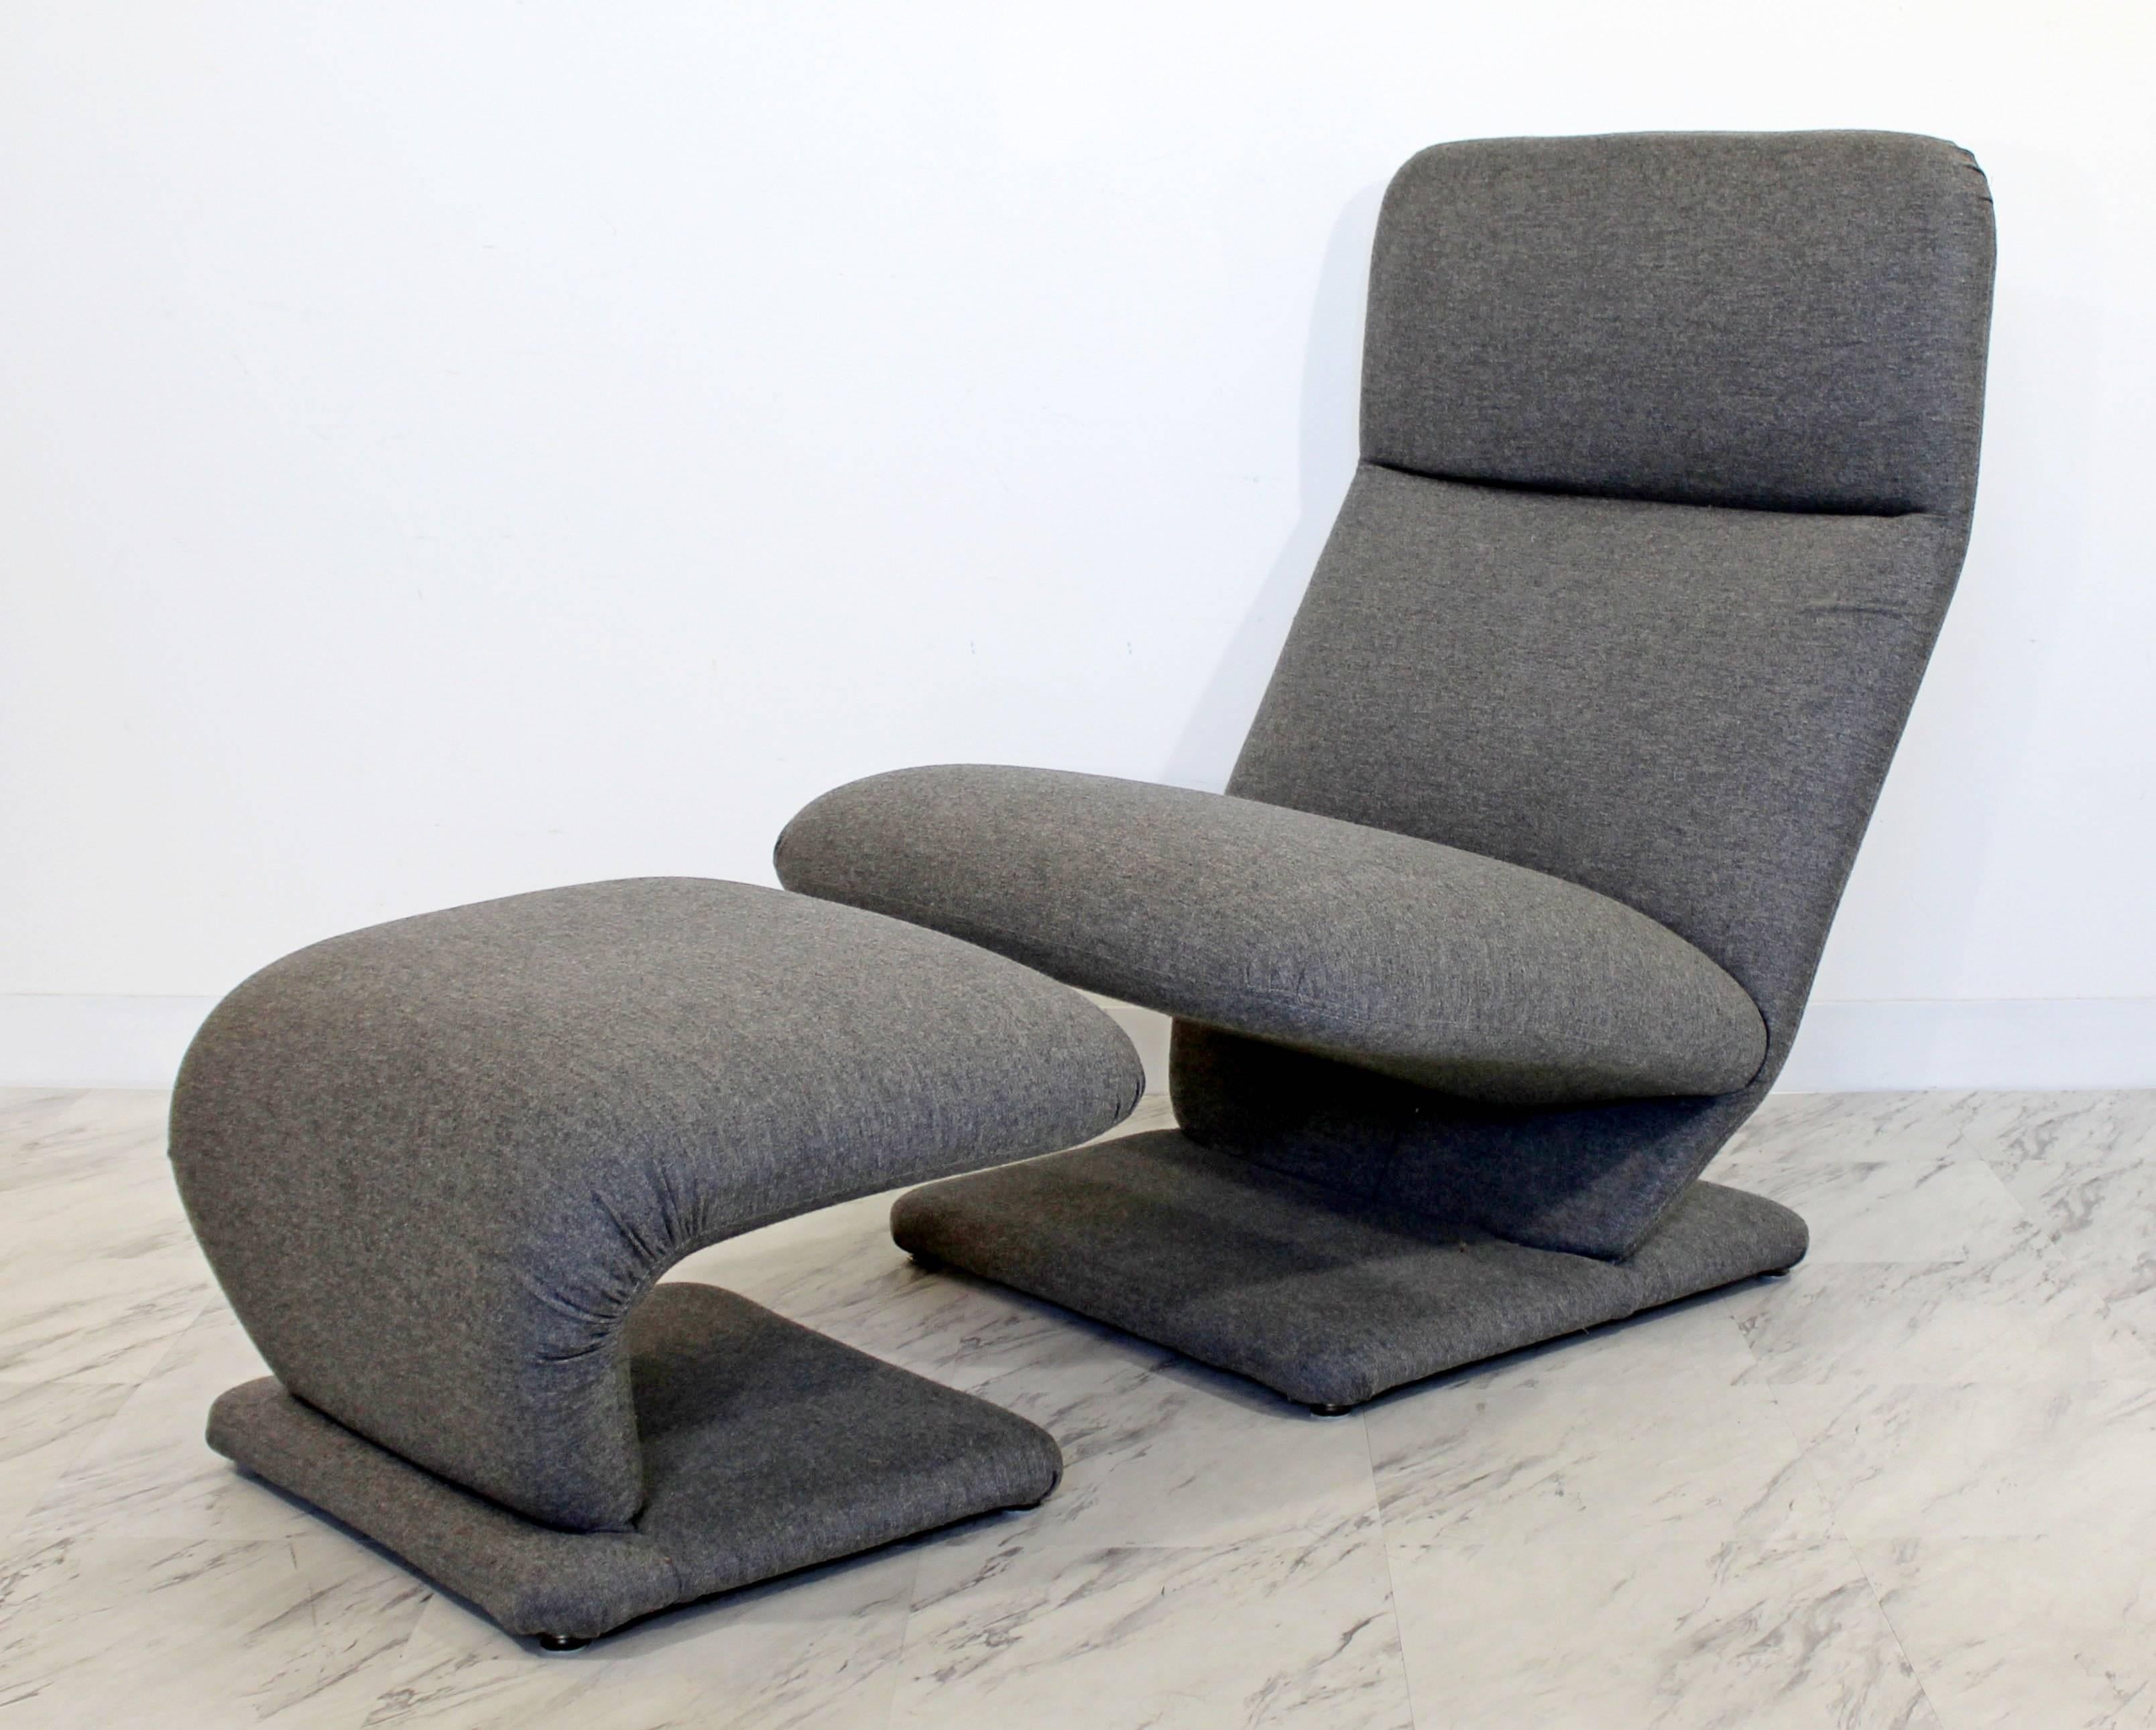 For your consideration is a phenomenal, grey, lounge chair and ottoman, by Milo Baughman for The Design Institute of America, circa the 1970s. In excellent condition. The dimensions of the chair are 27